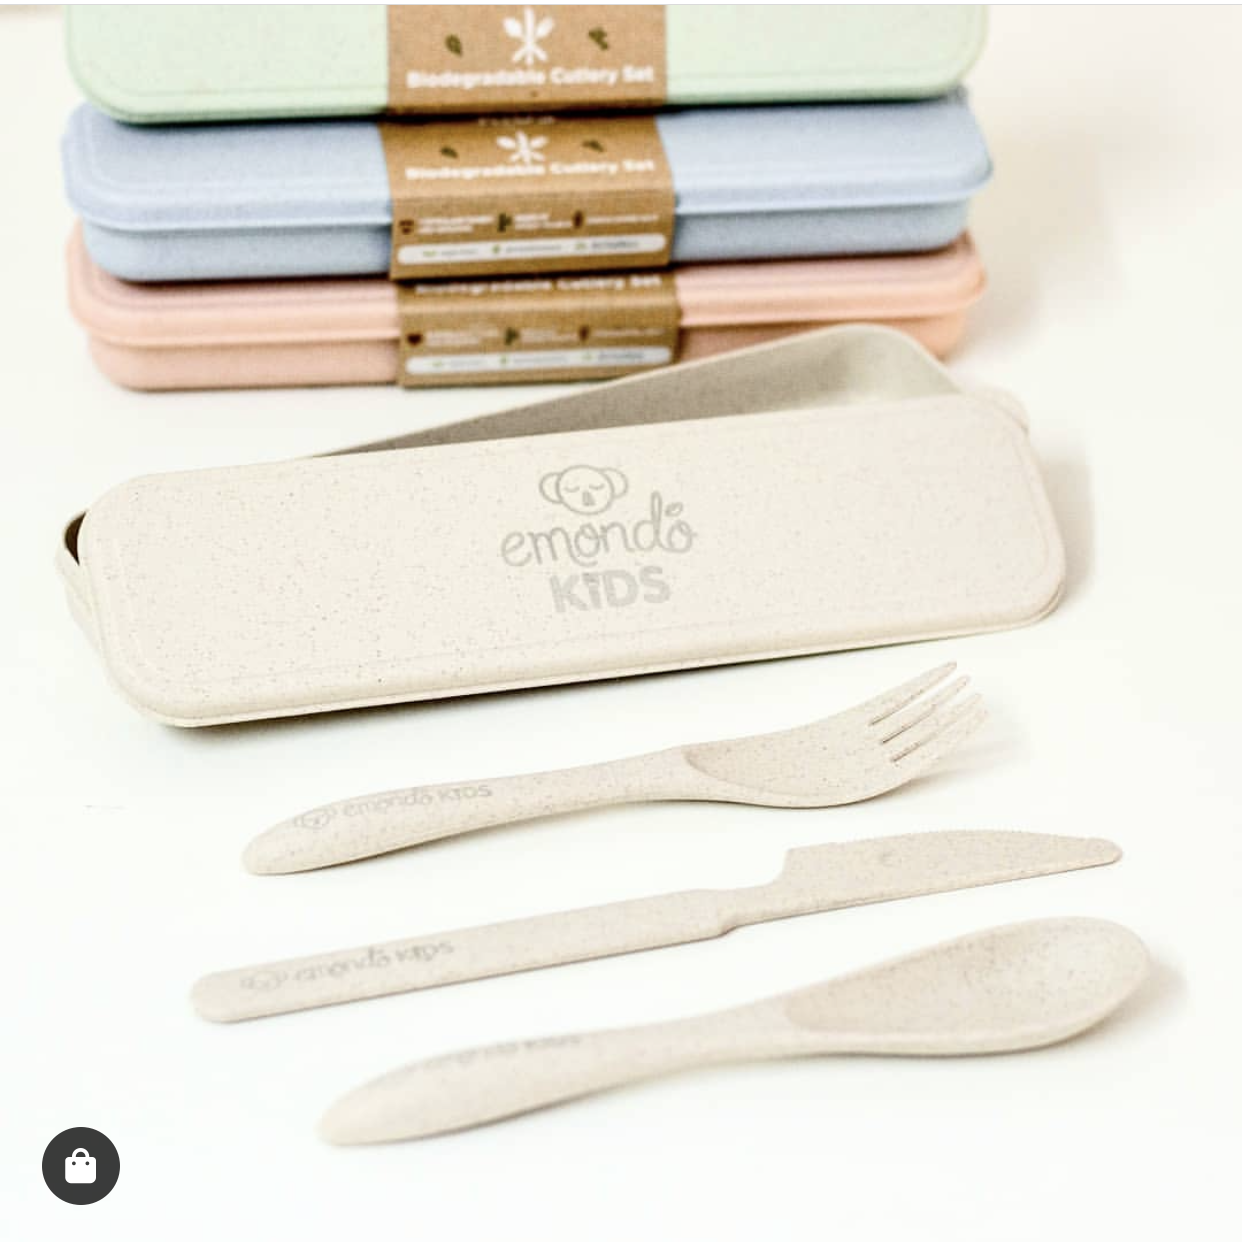 Eco Cutlery Set: Each box contains 1 x fork, 1 x knife, 1 x spoon.